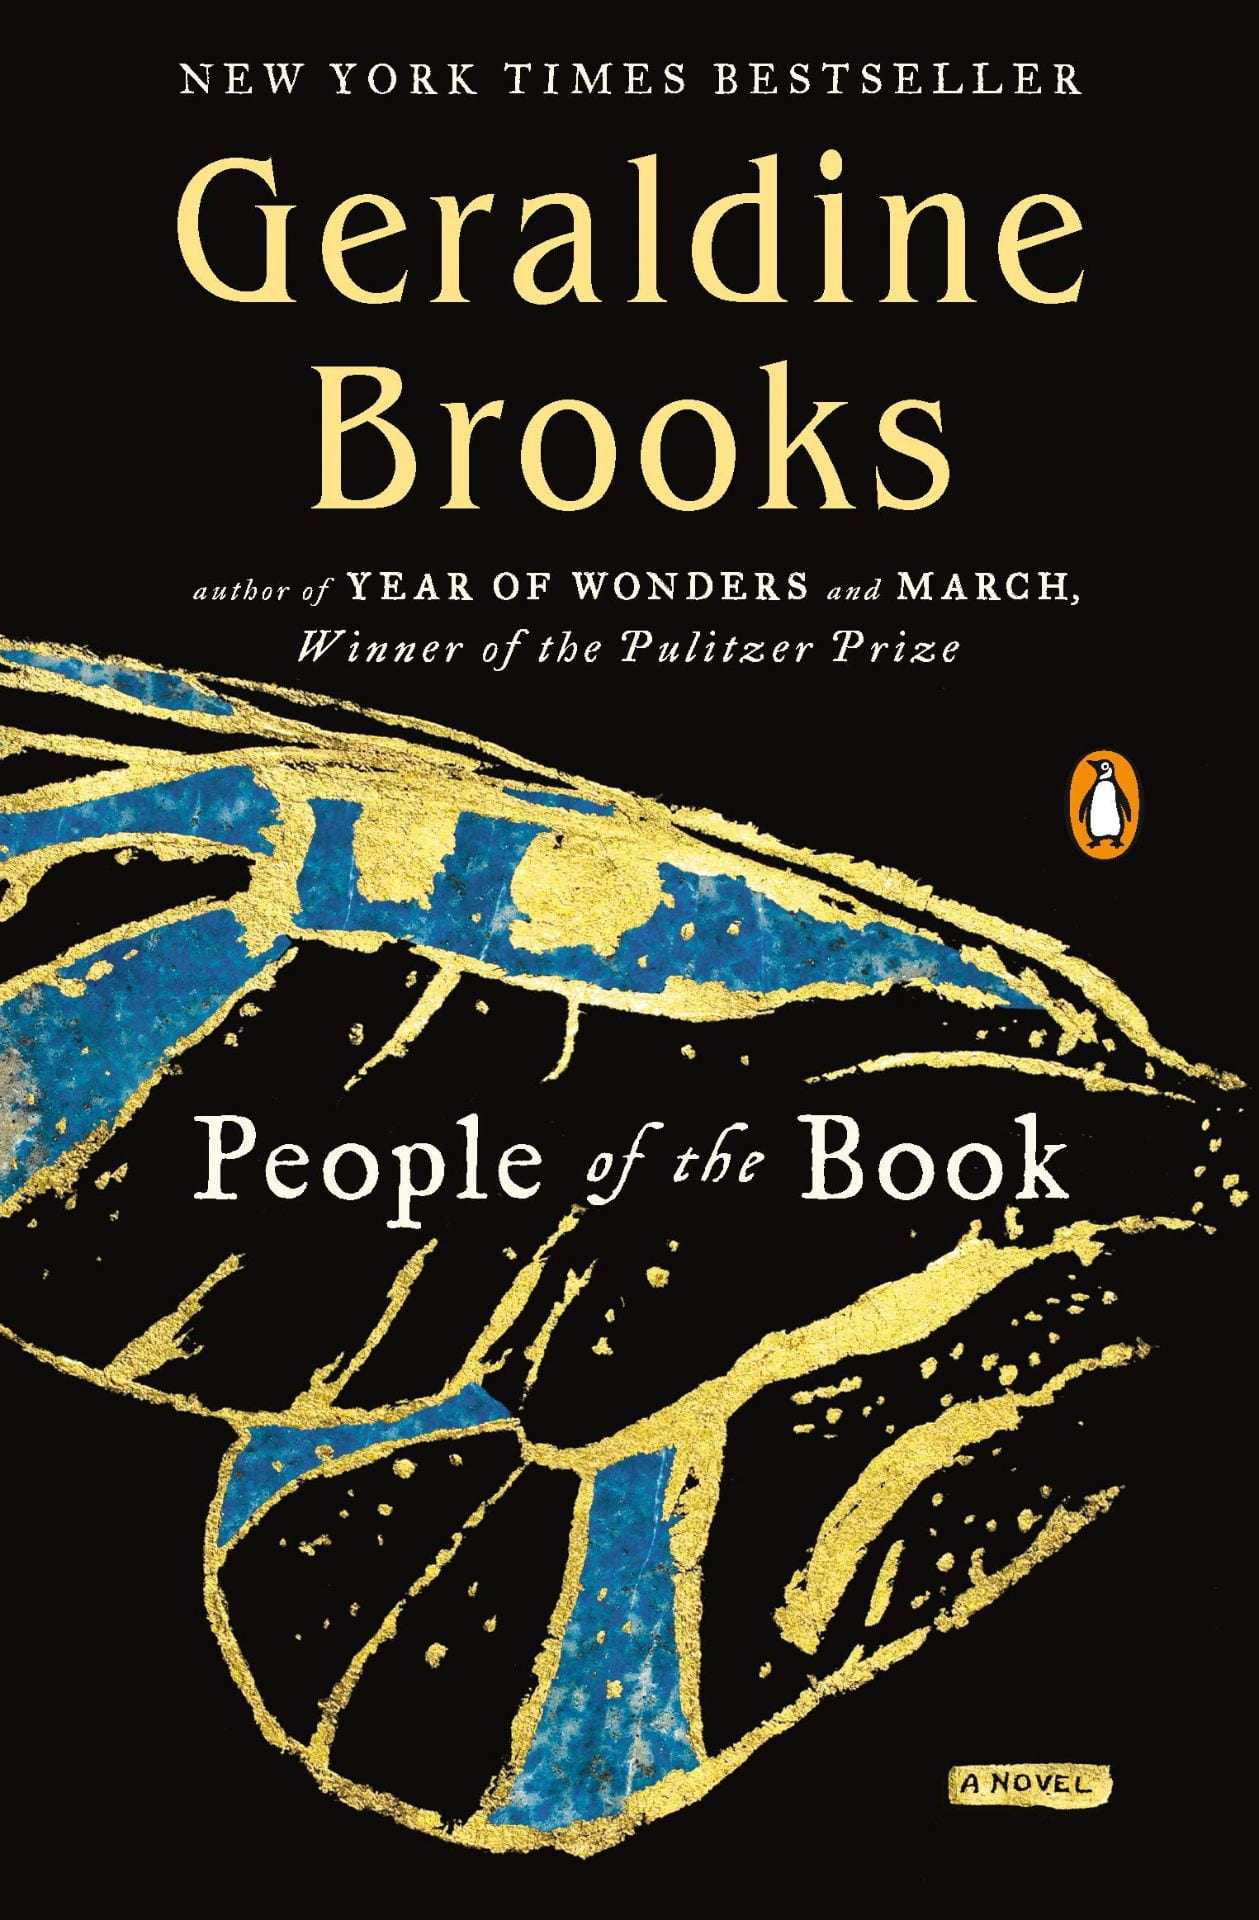 Book cover for "People of the Book